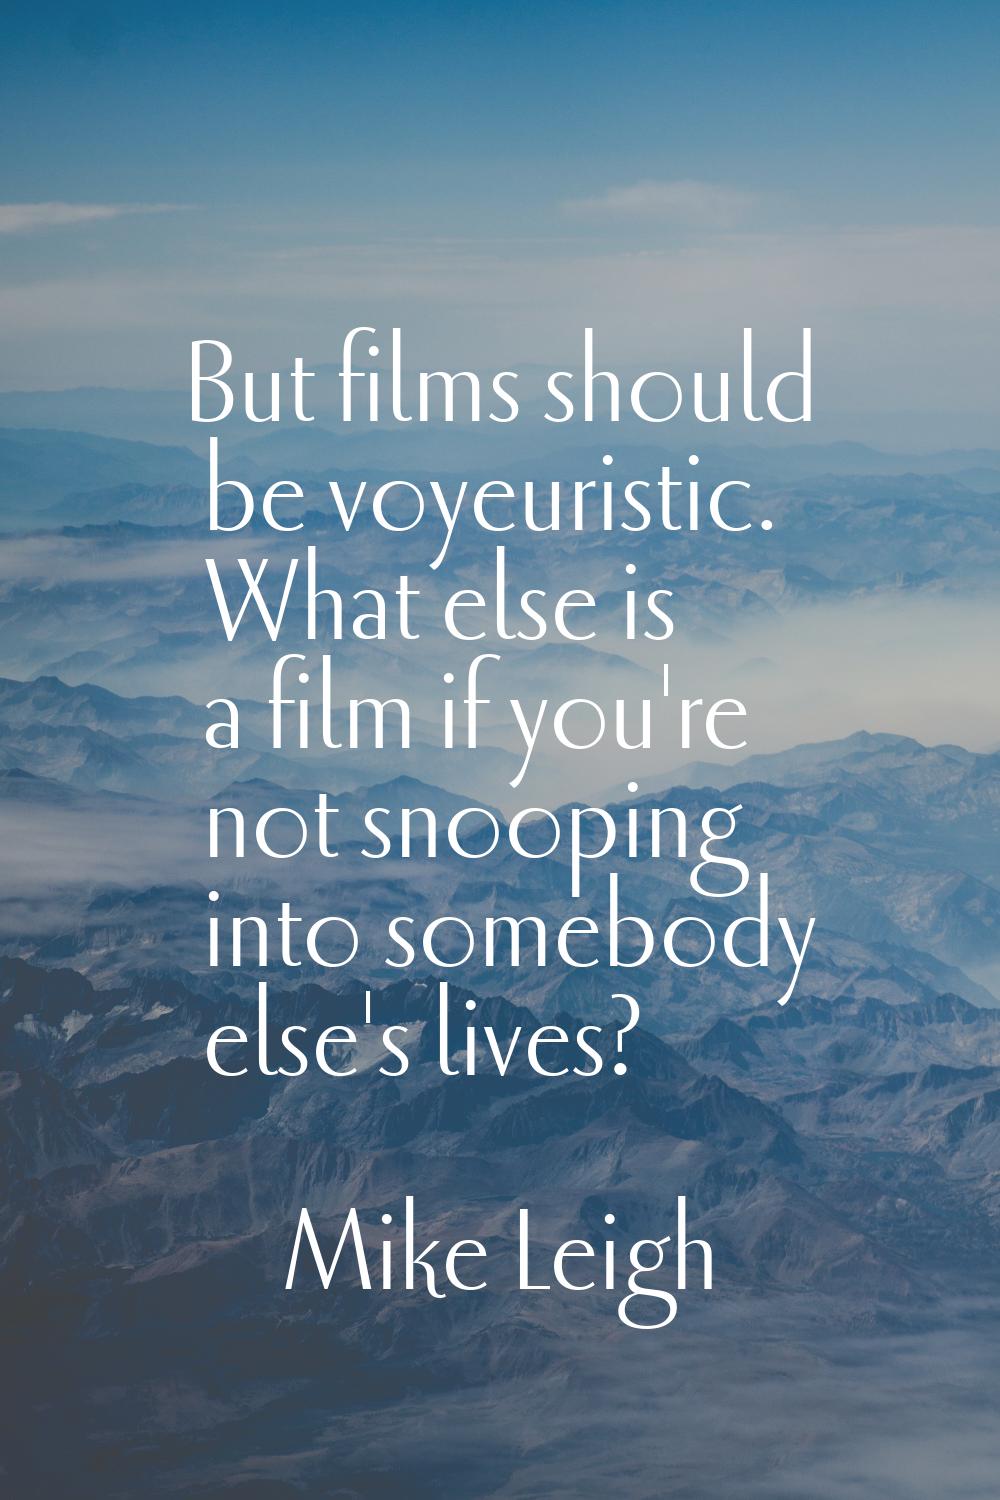 But films should be voyeuristic. What else is a film if you're not snooping into somebody else's li